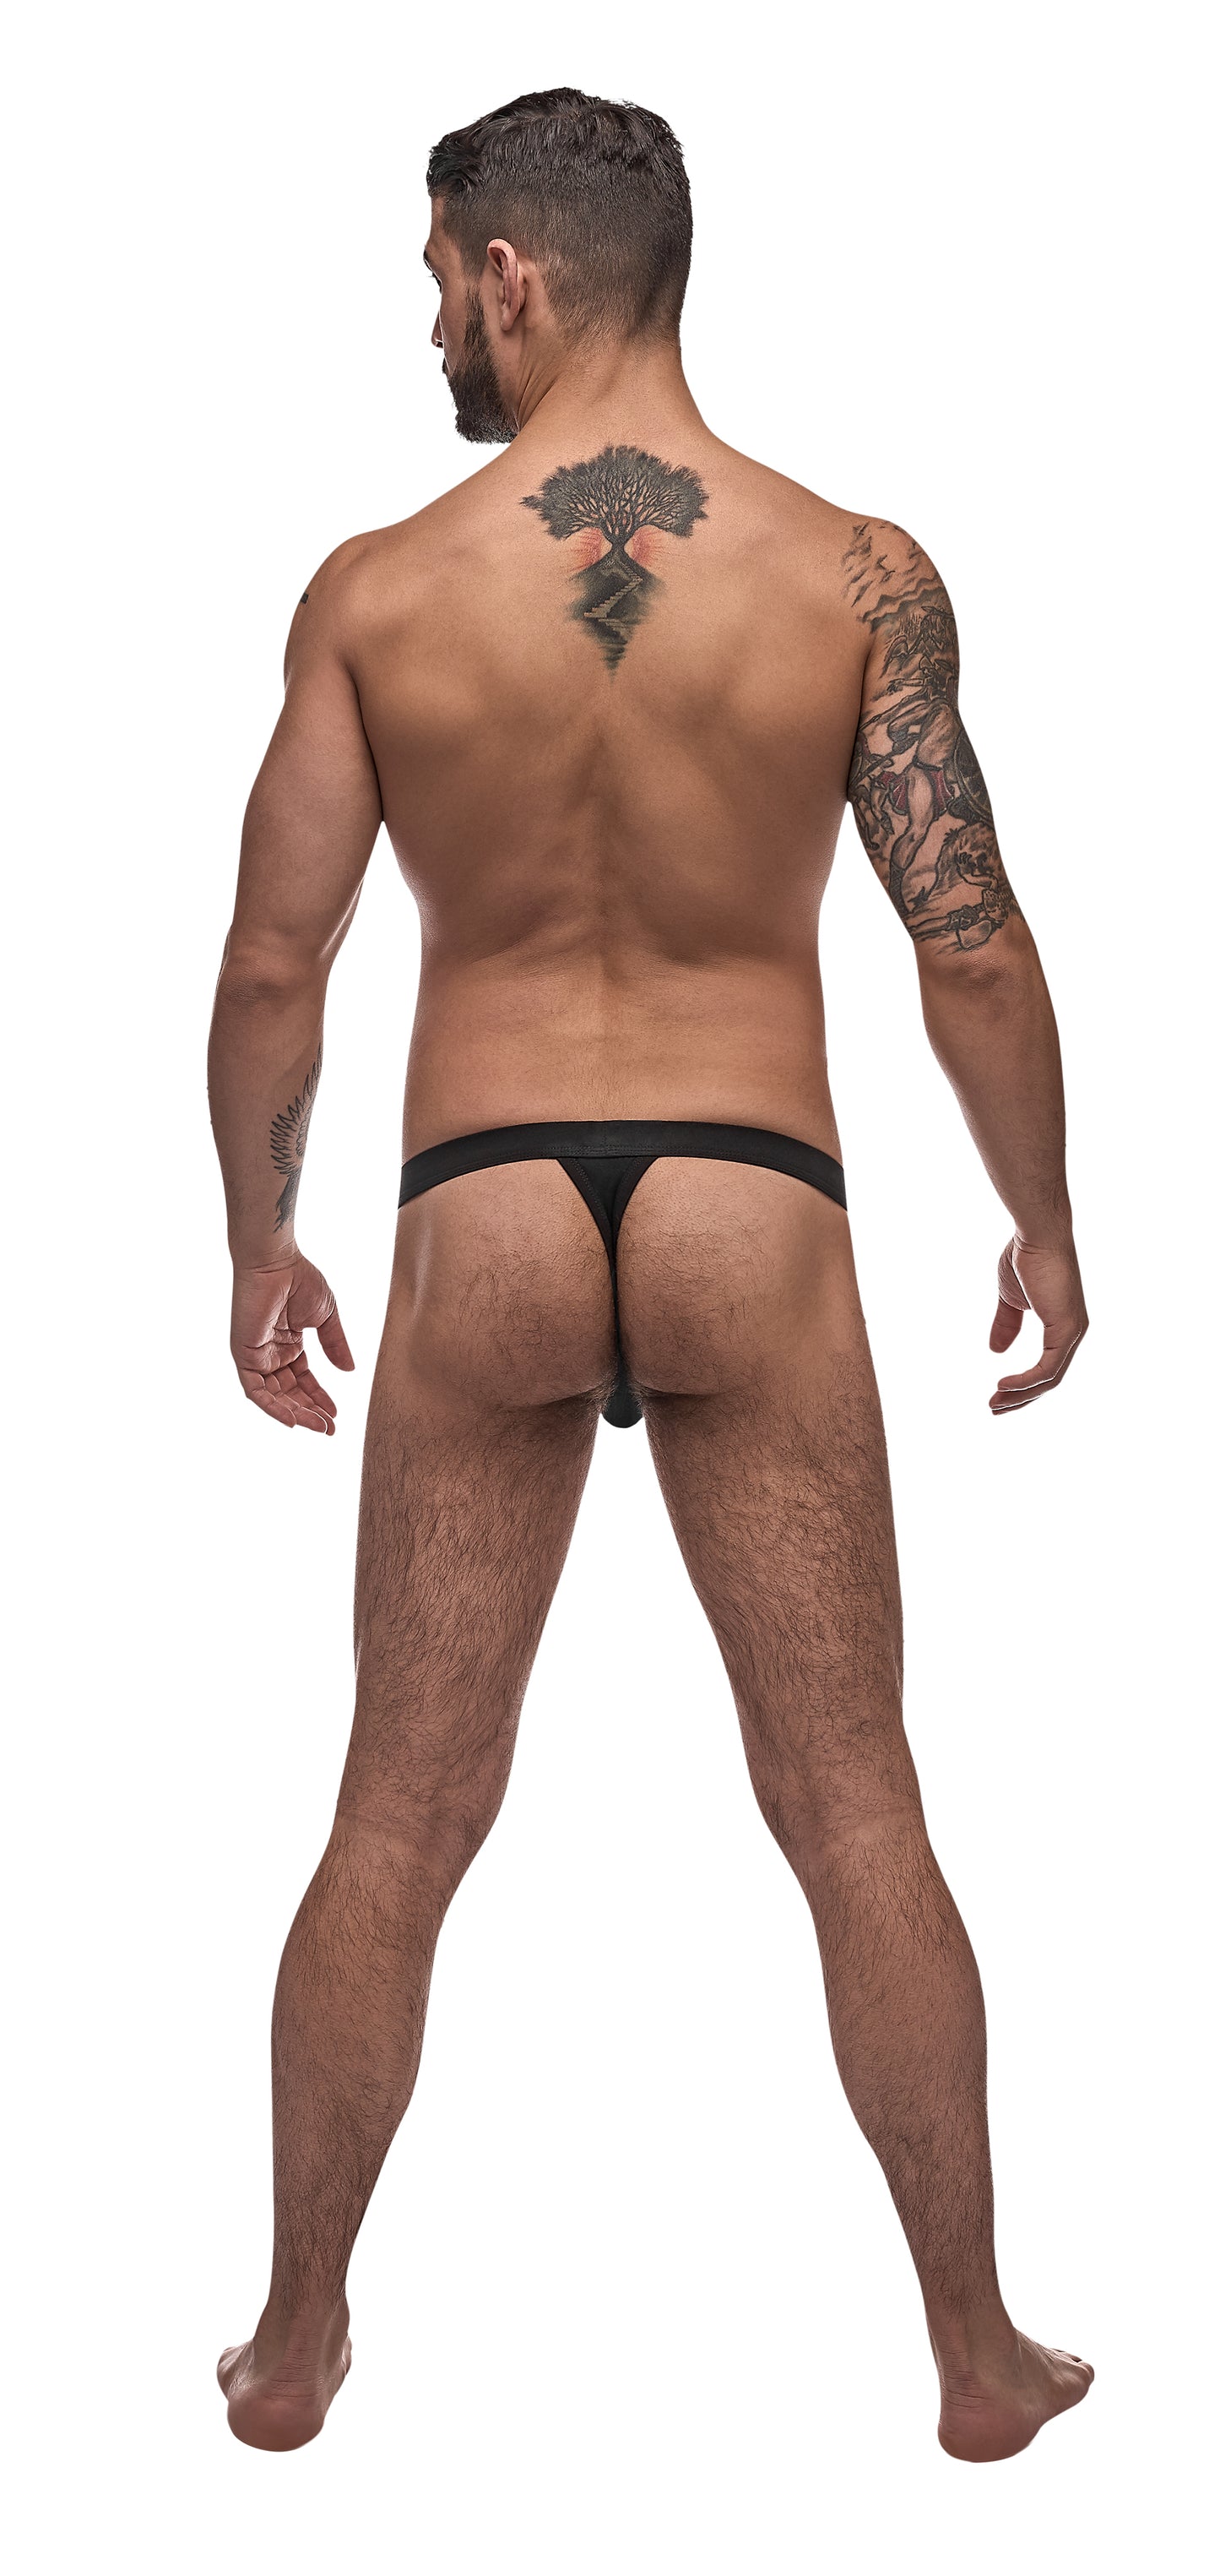 Male Power Pure Comfort Bong Thong - Just for you desires